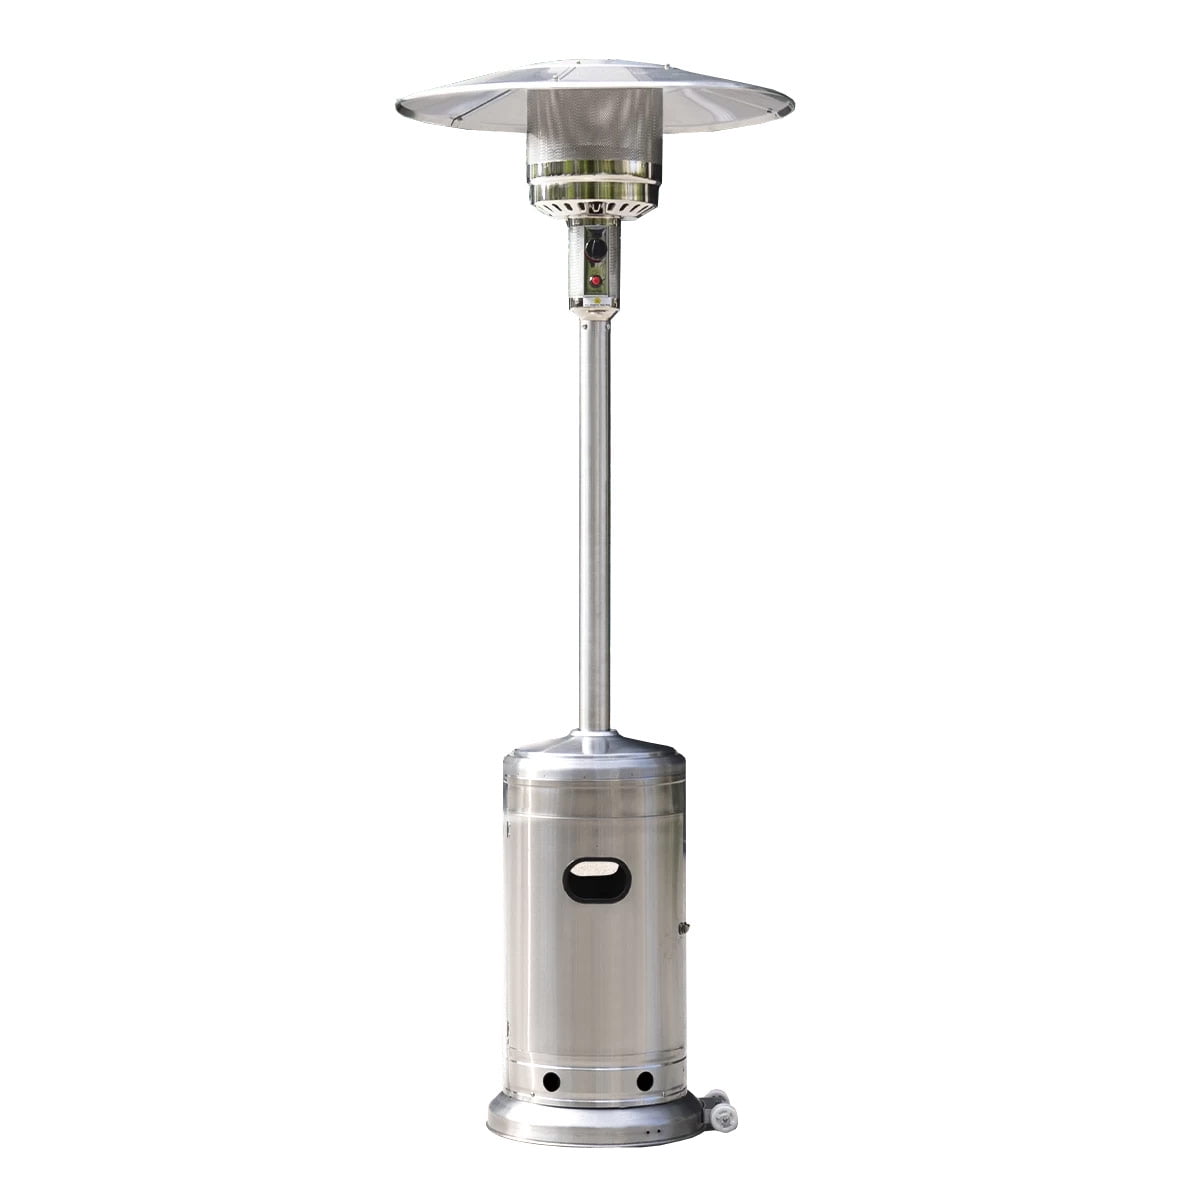 Hammered Silver/Pewter Patio Heater with Drink Table & Wheels XL-Series Natural Gas Golden Flame 45,000 BTU 